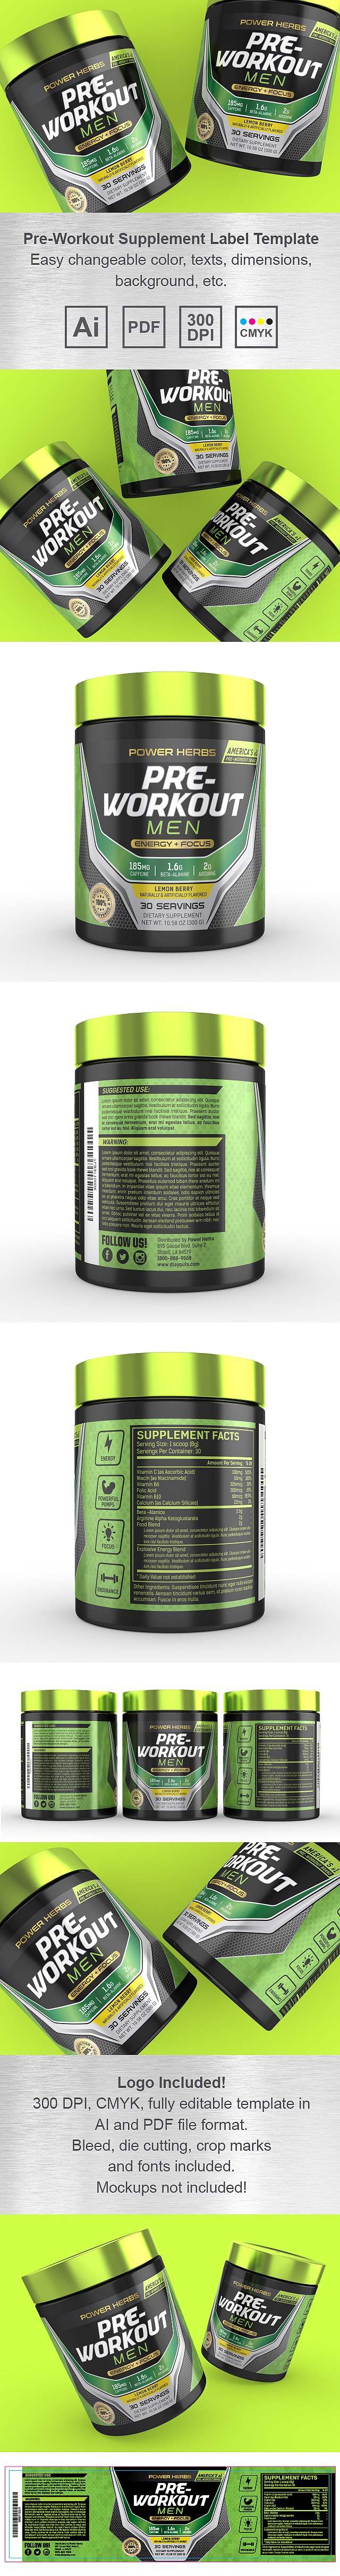 Pre Workout for Men Supplement Label Template